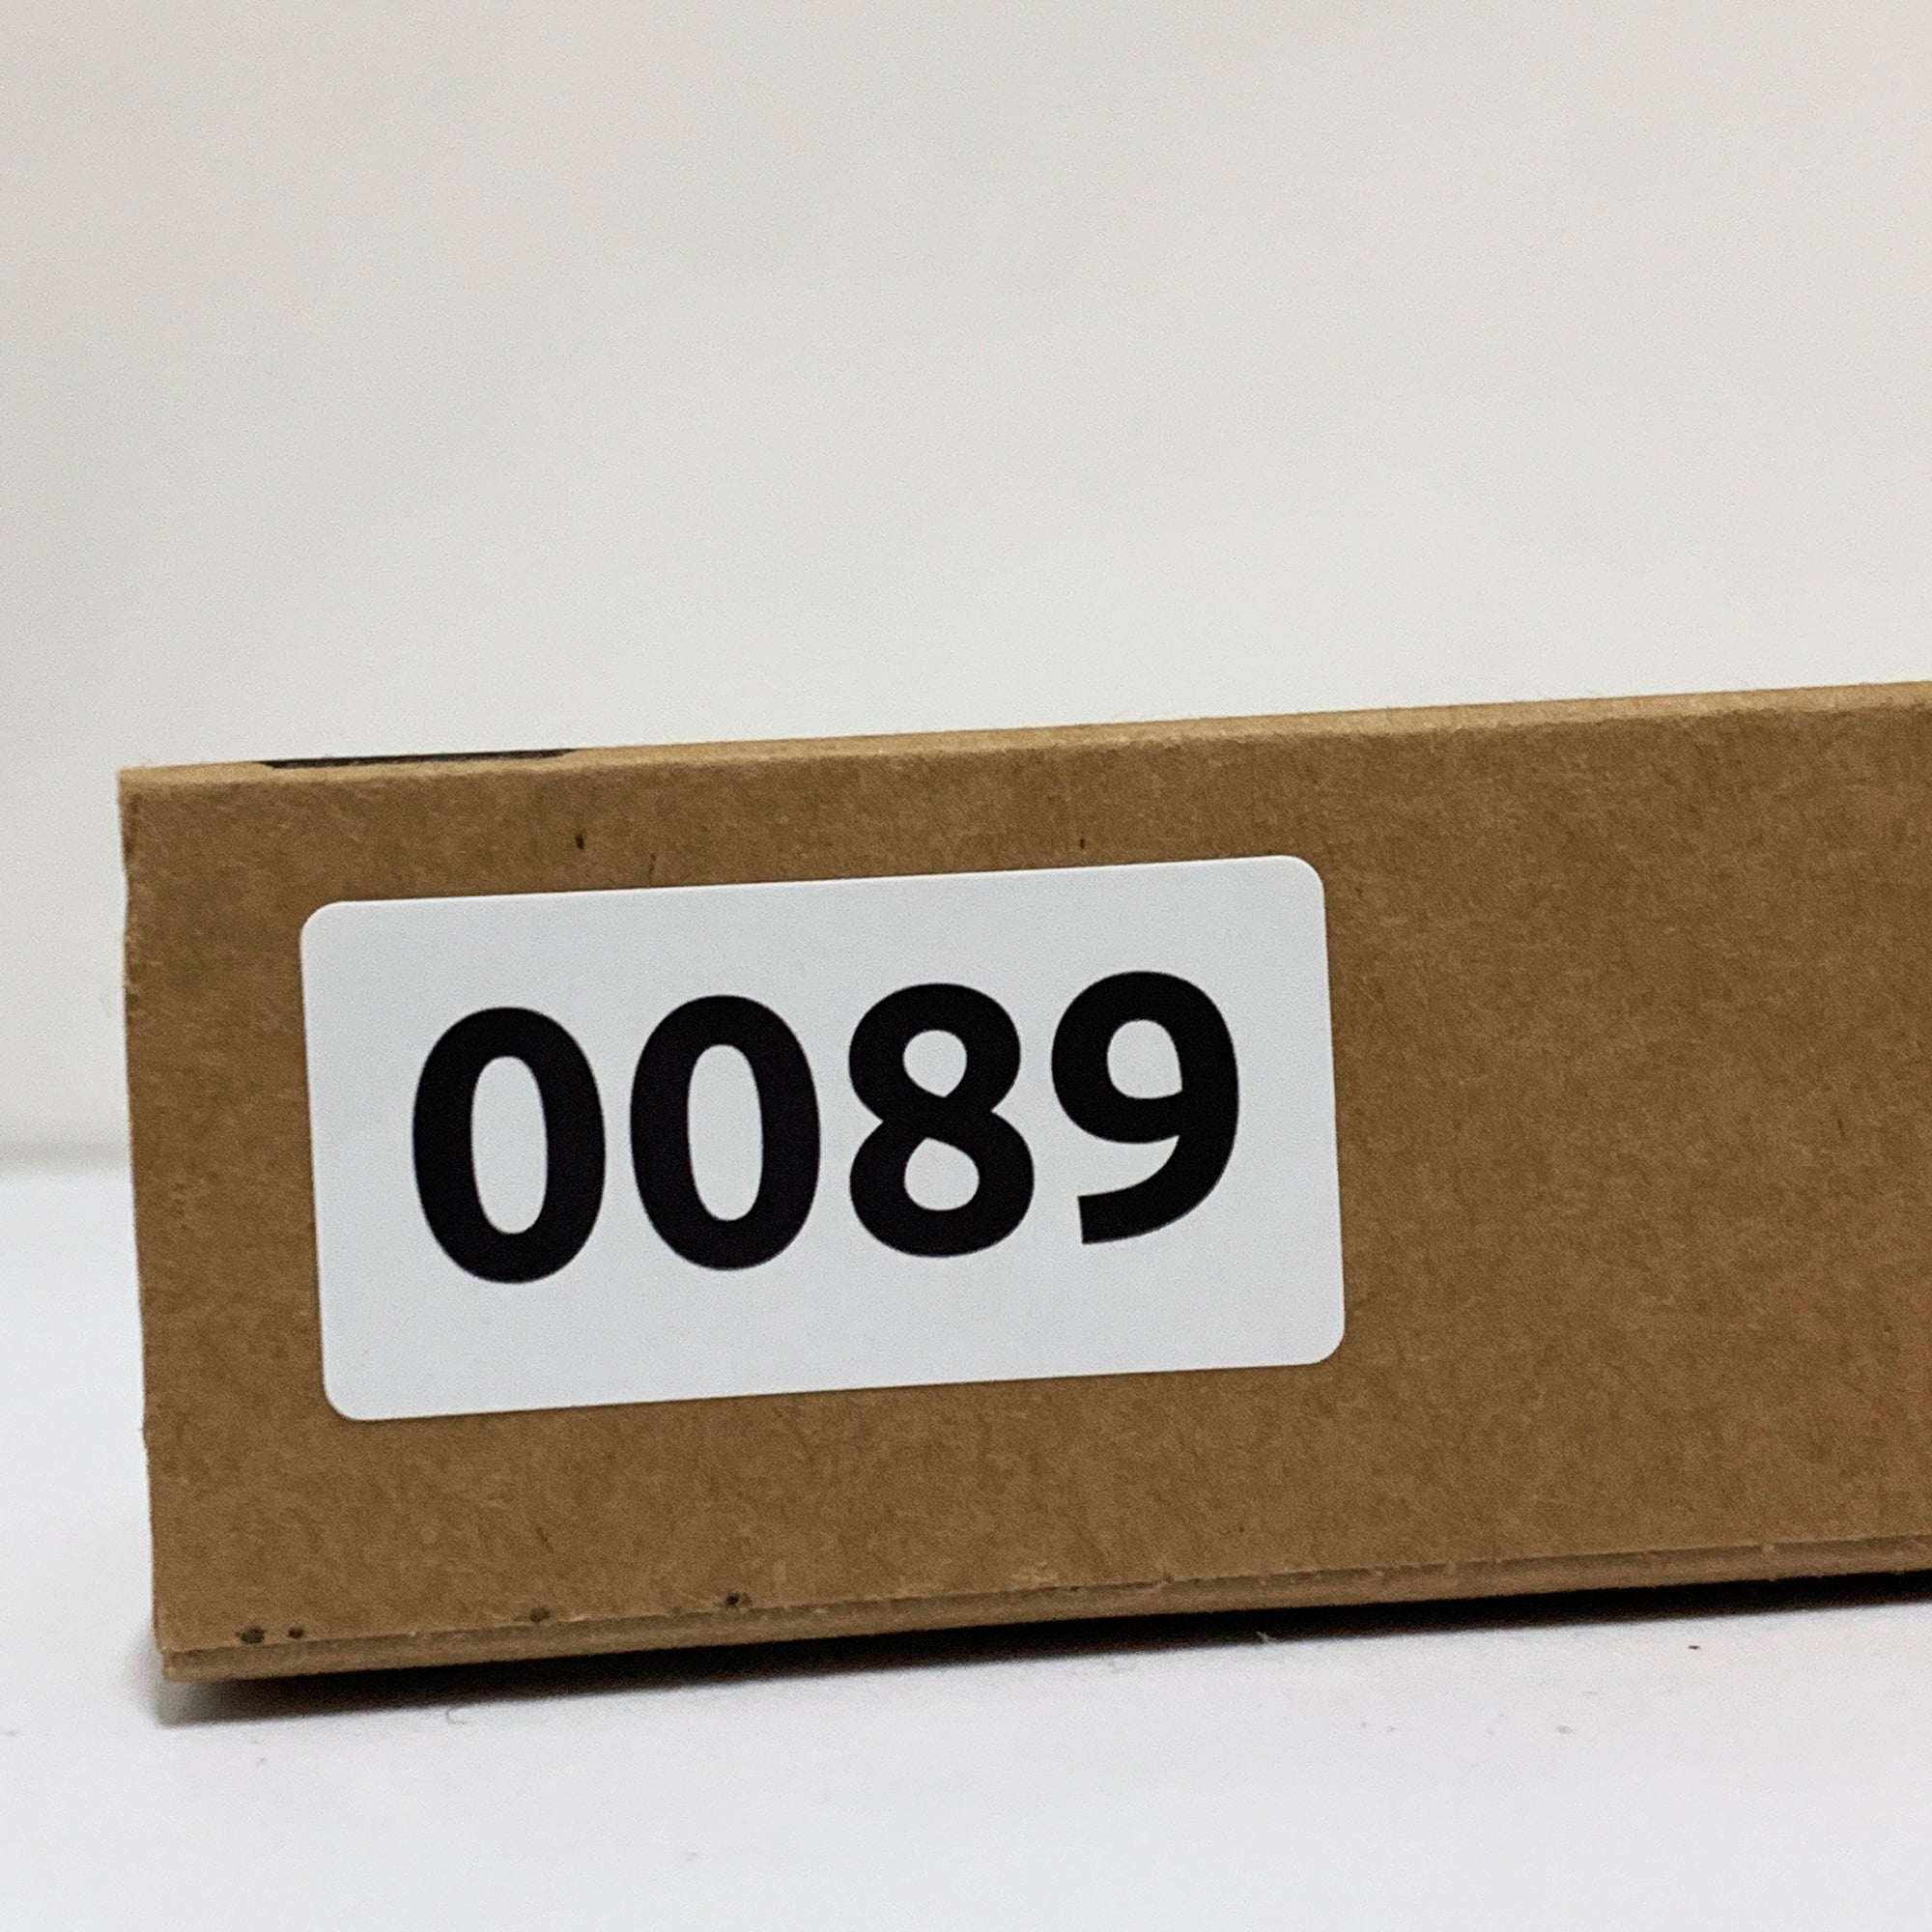 4 x 2 cm 1-1000 Consecutive Number Inventory Labels Stickers Sheets 